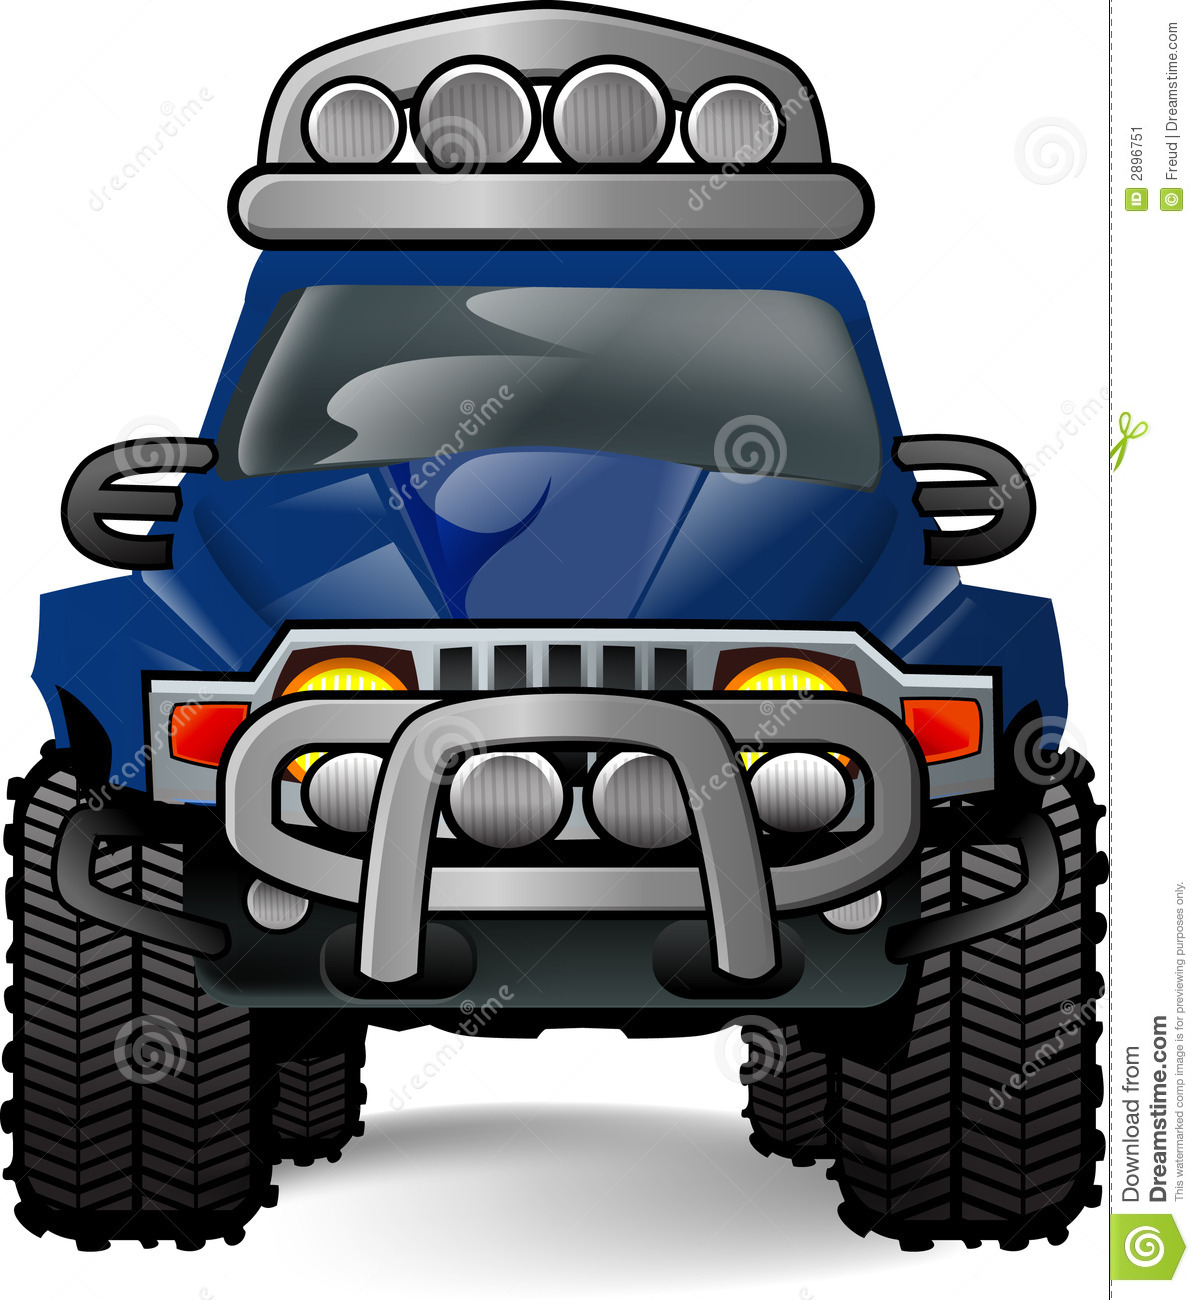 Off Road Car Stock Image   Image  2896751